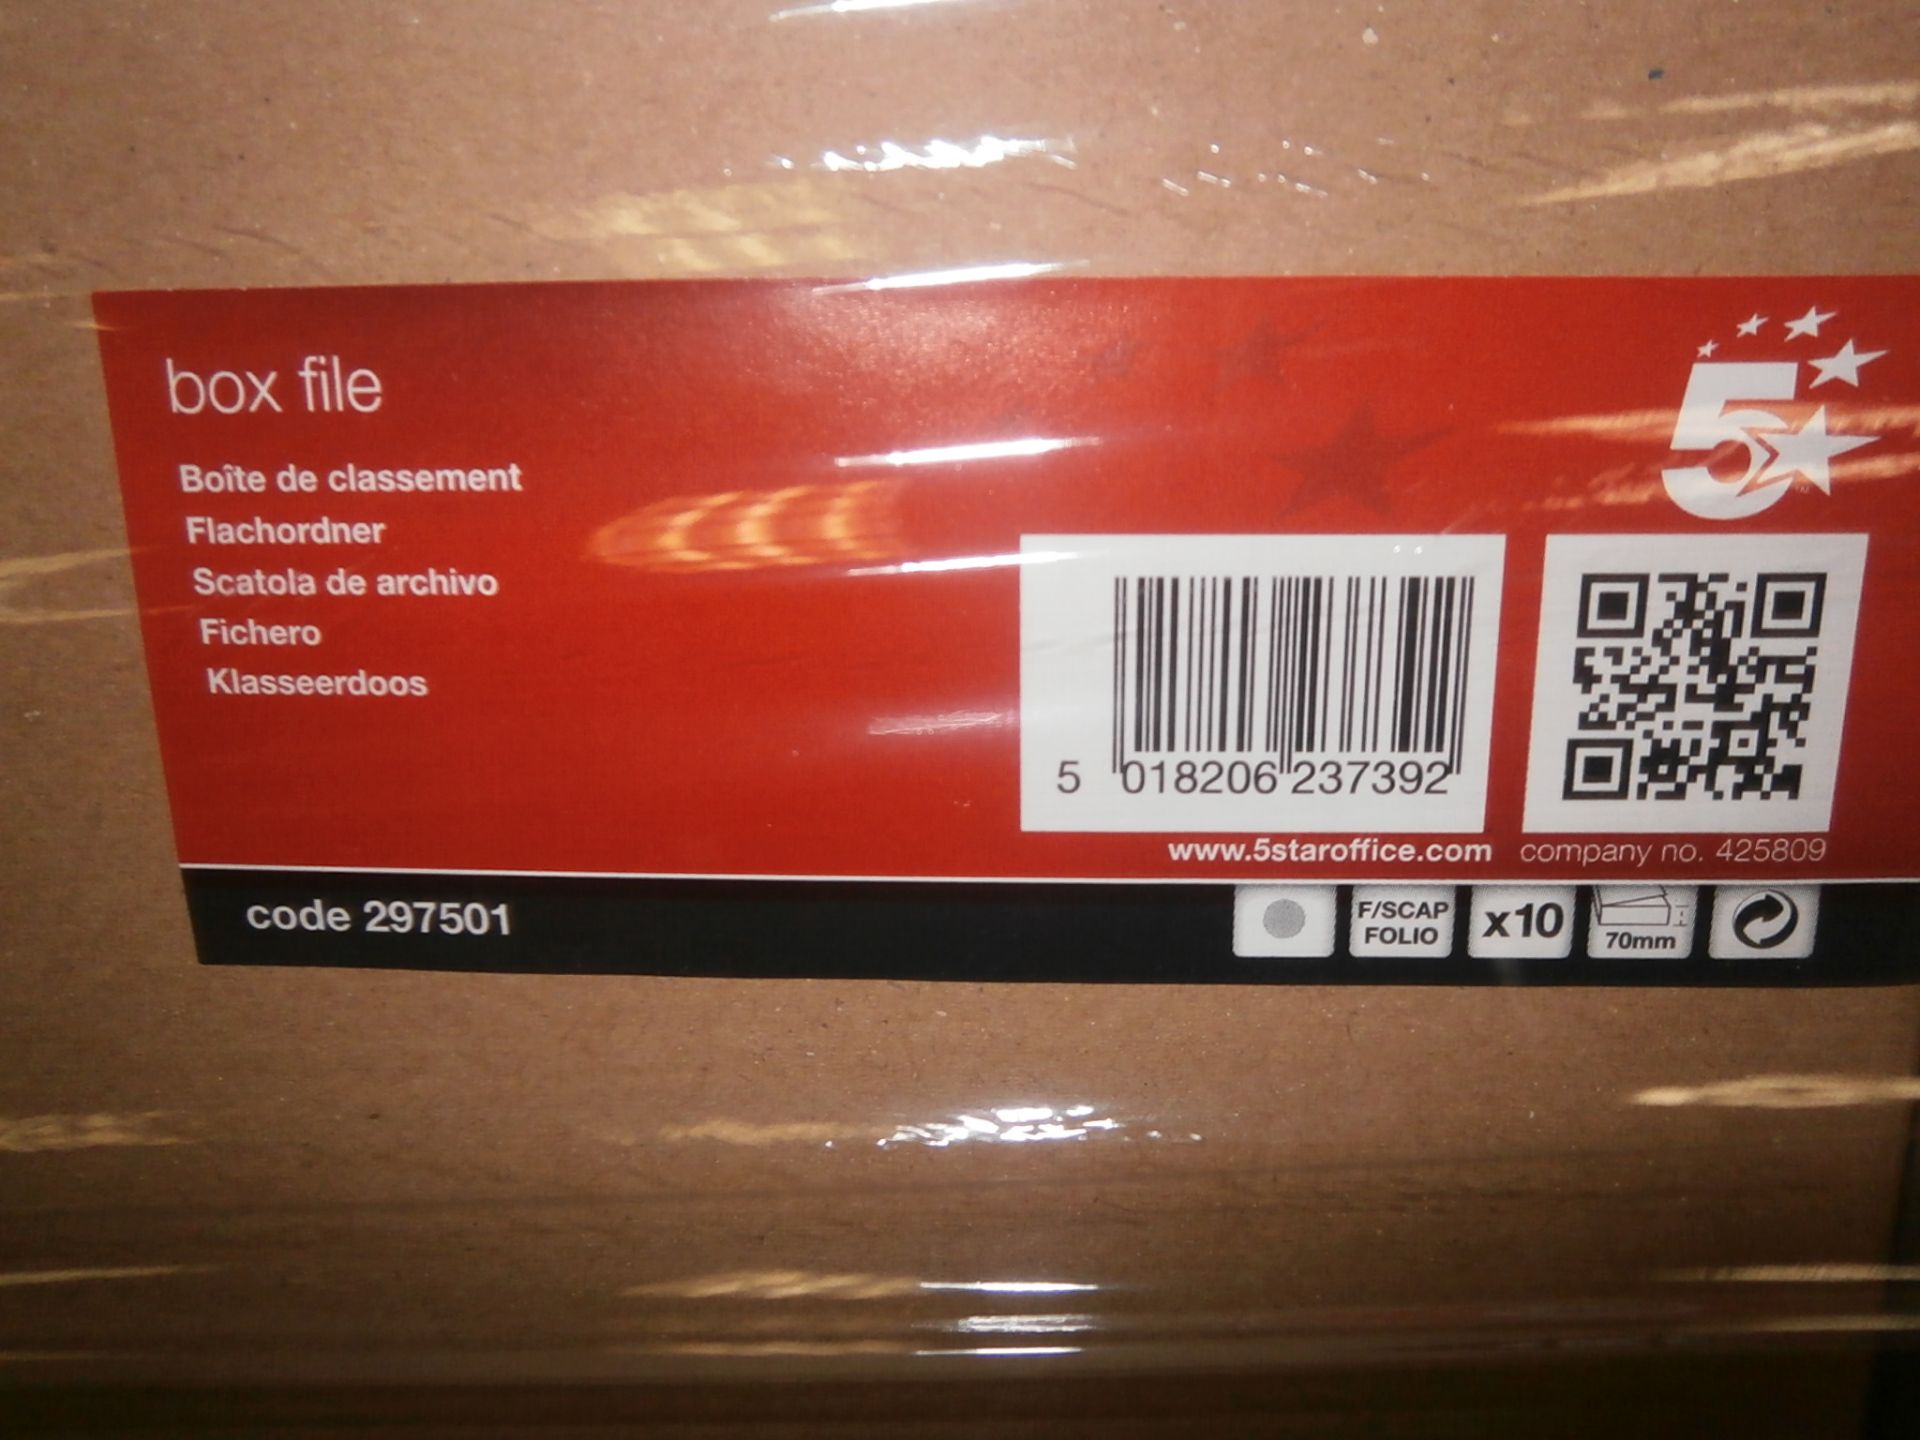 10 x Boxes of 5 Star Box Files 70mm Cloud Effect Product Code 297501 - 10 Files Per Box, 100 in - Image 3 of 4